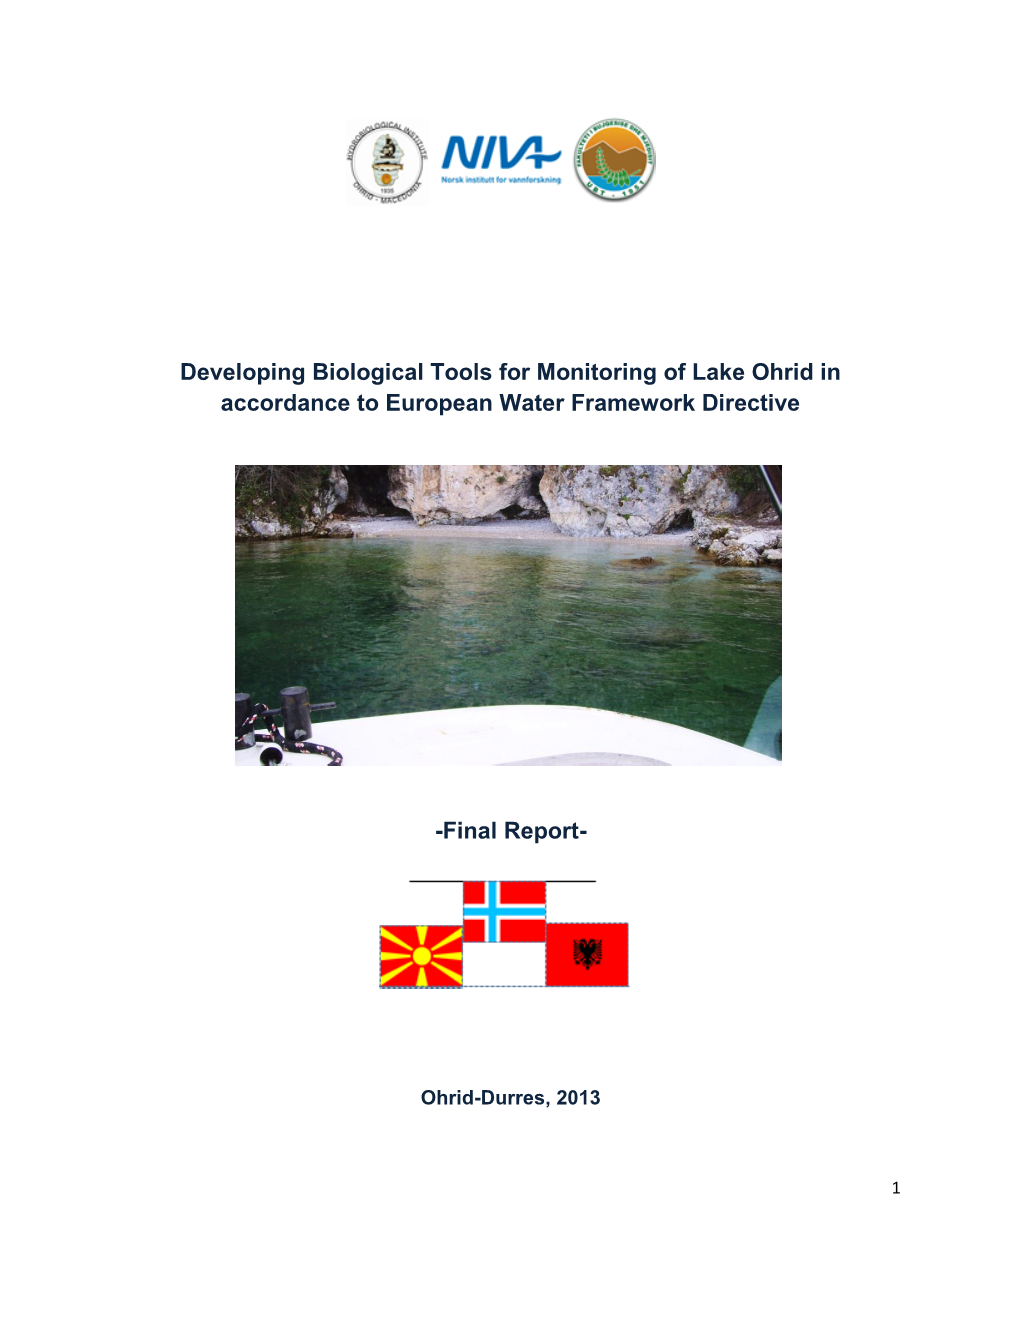 Developing Biological Tools for Monitoring of Lake Ohrid in Accordance to European Water Framework Directive -Final Report